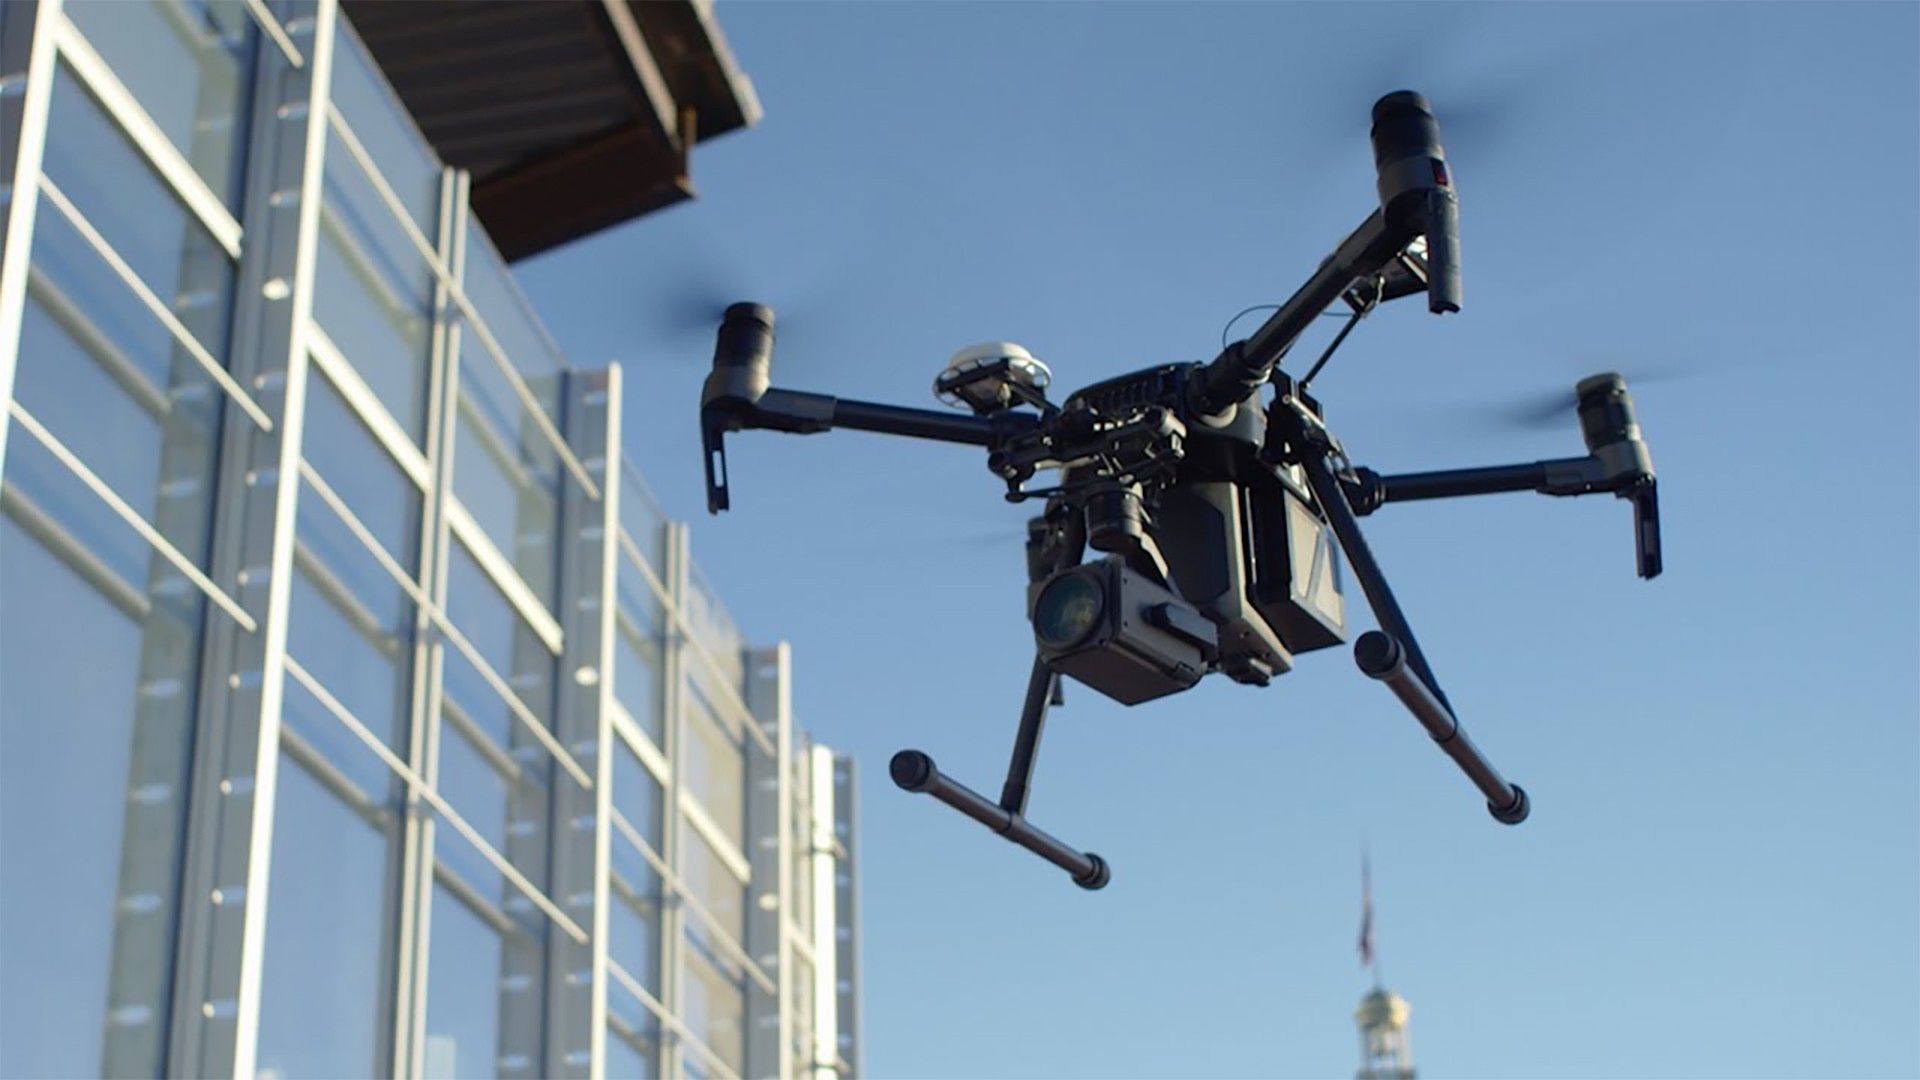 DJI Drones Temporarily Banned Due to Malfunctions in UK